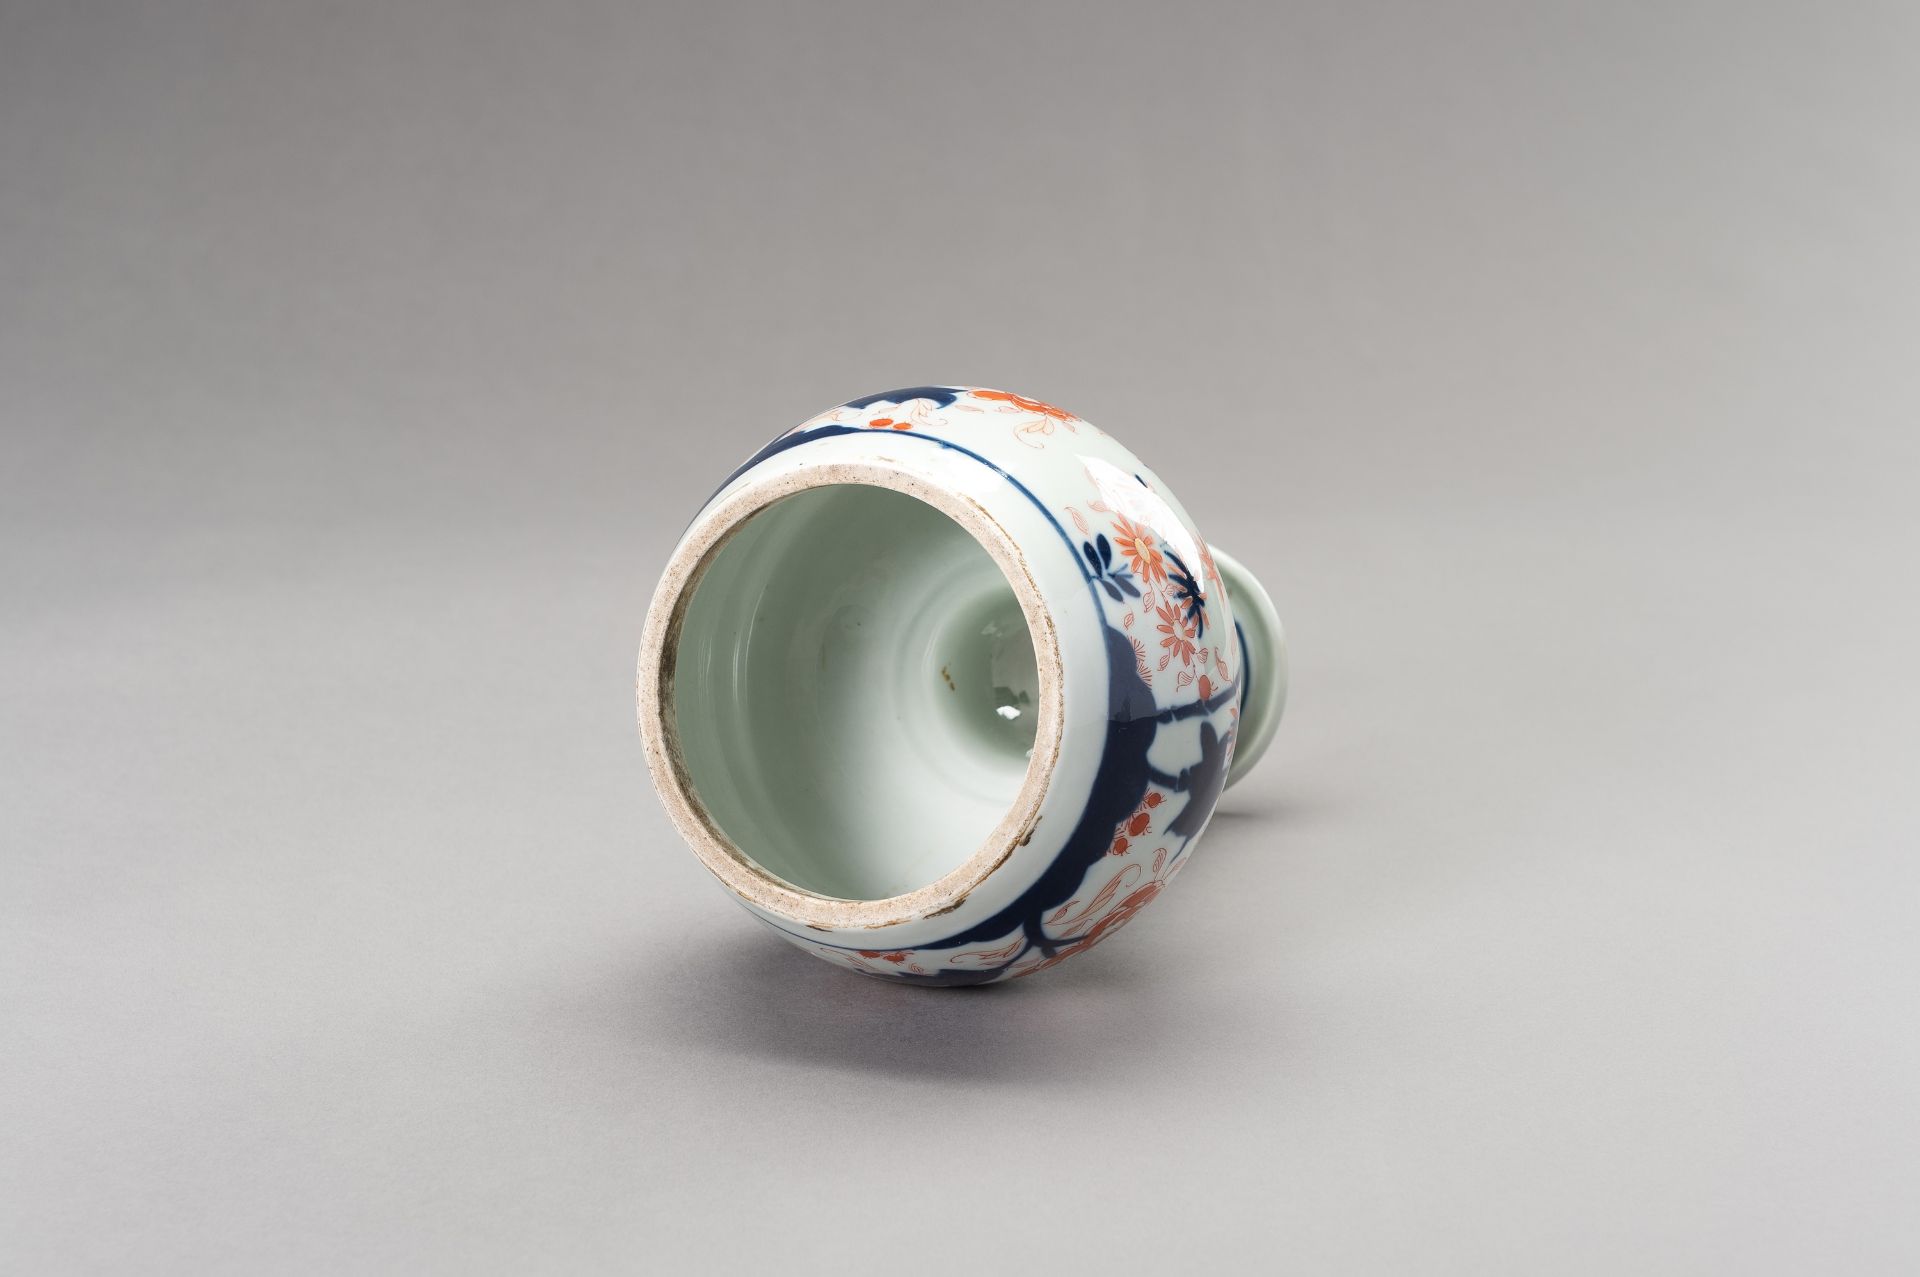 AN IMARI 'FLOWERS AND BAMBOO' PORCELAIN VASE, QING DYNASTY - Image 8 of 11